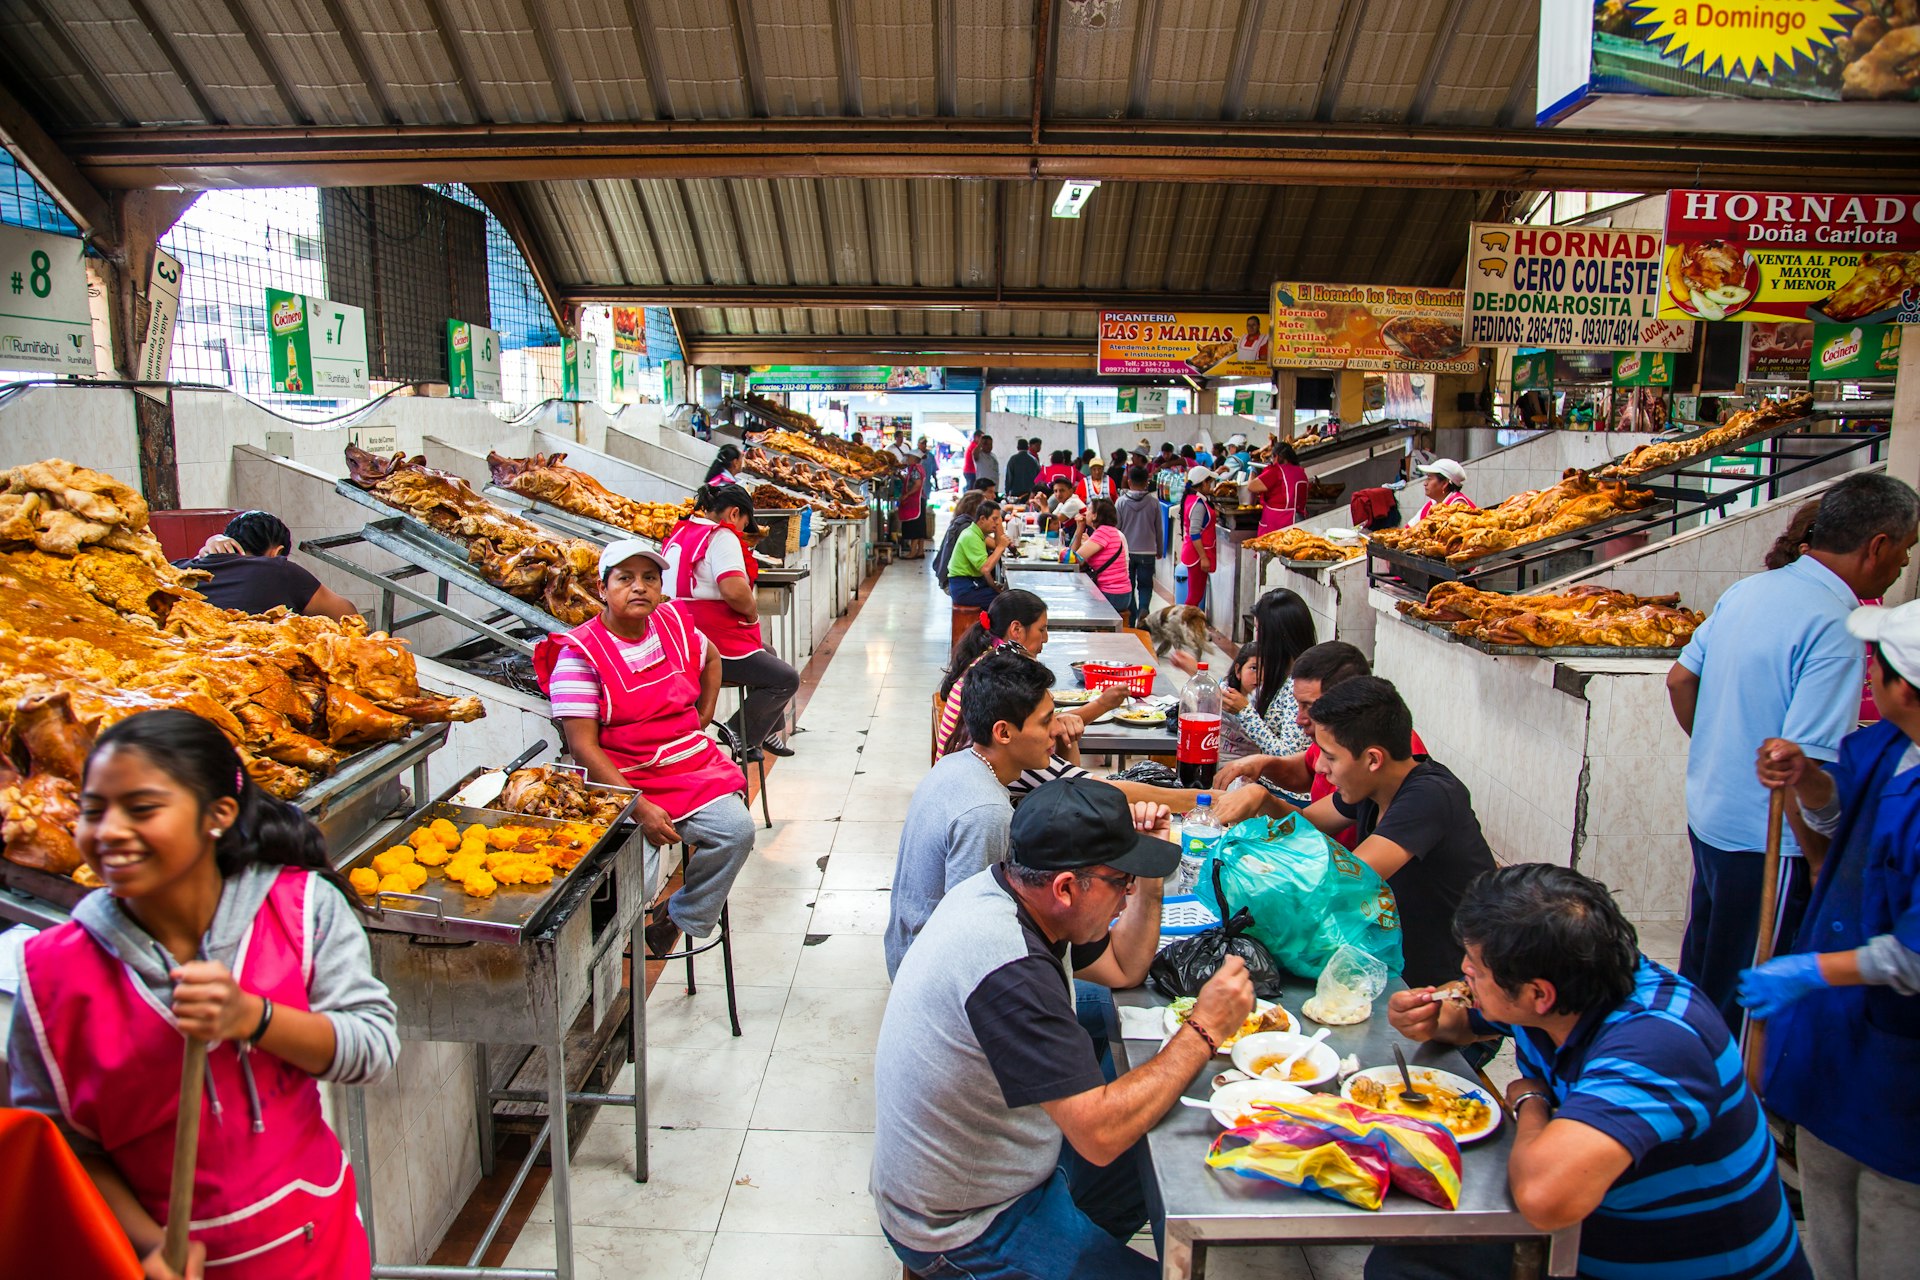 People eat pork dishes at long tables in a local market in Ecuador